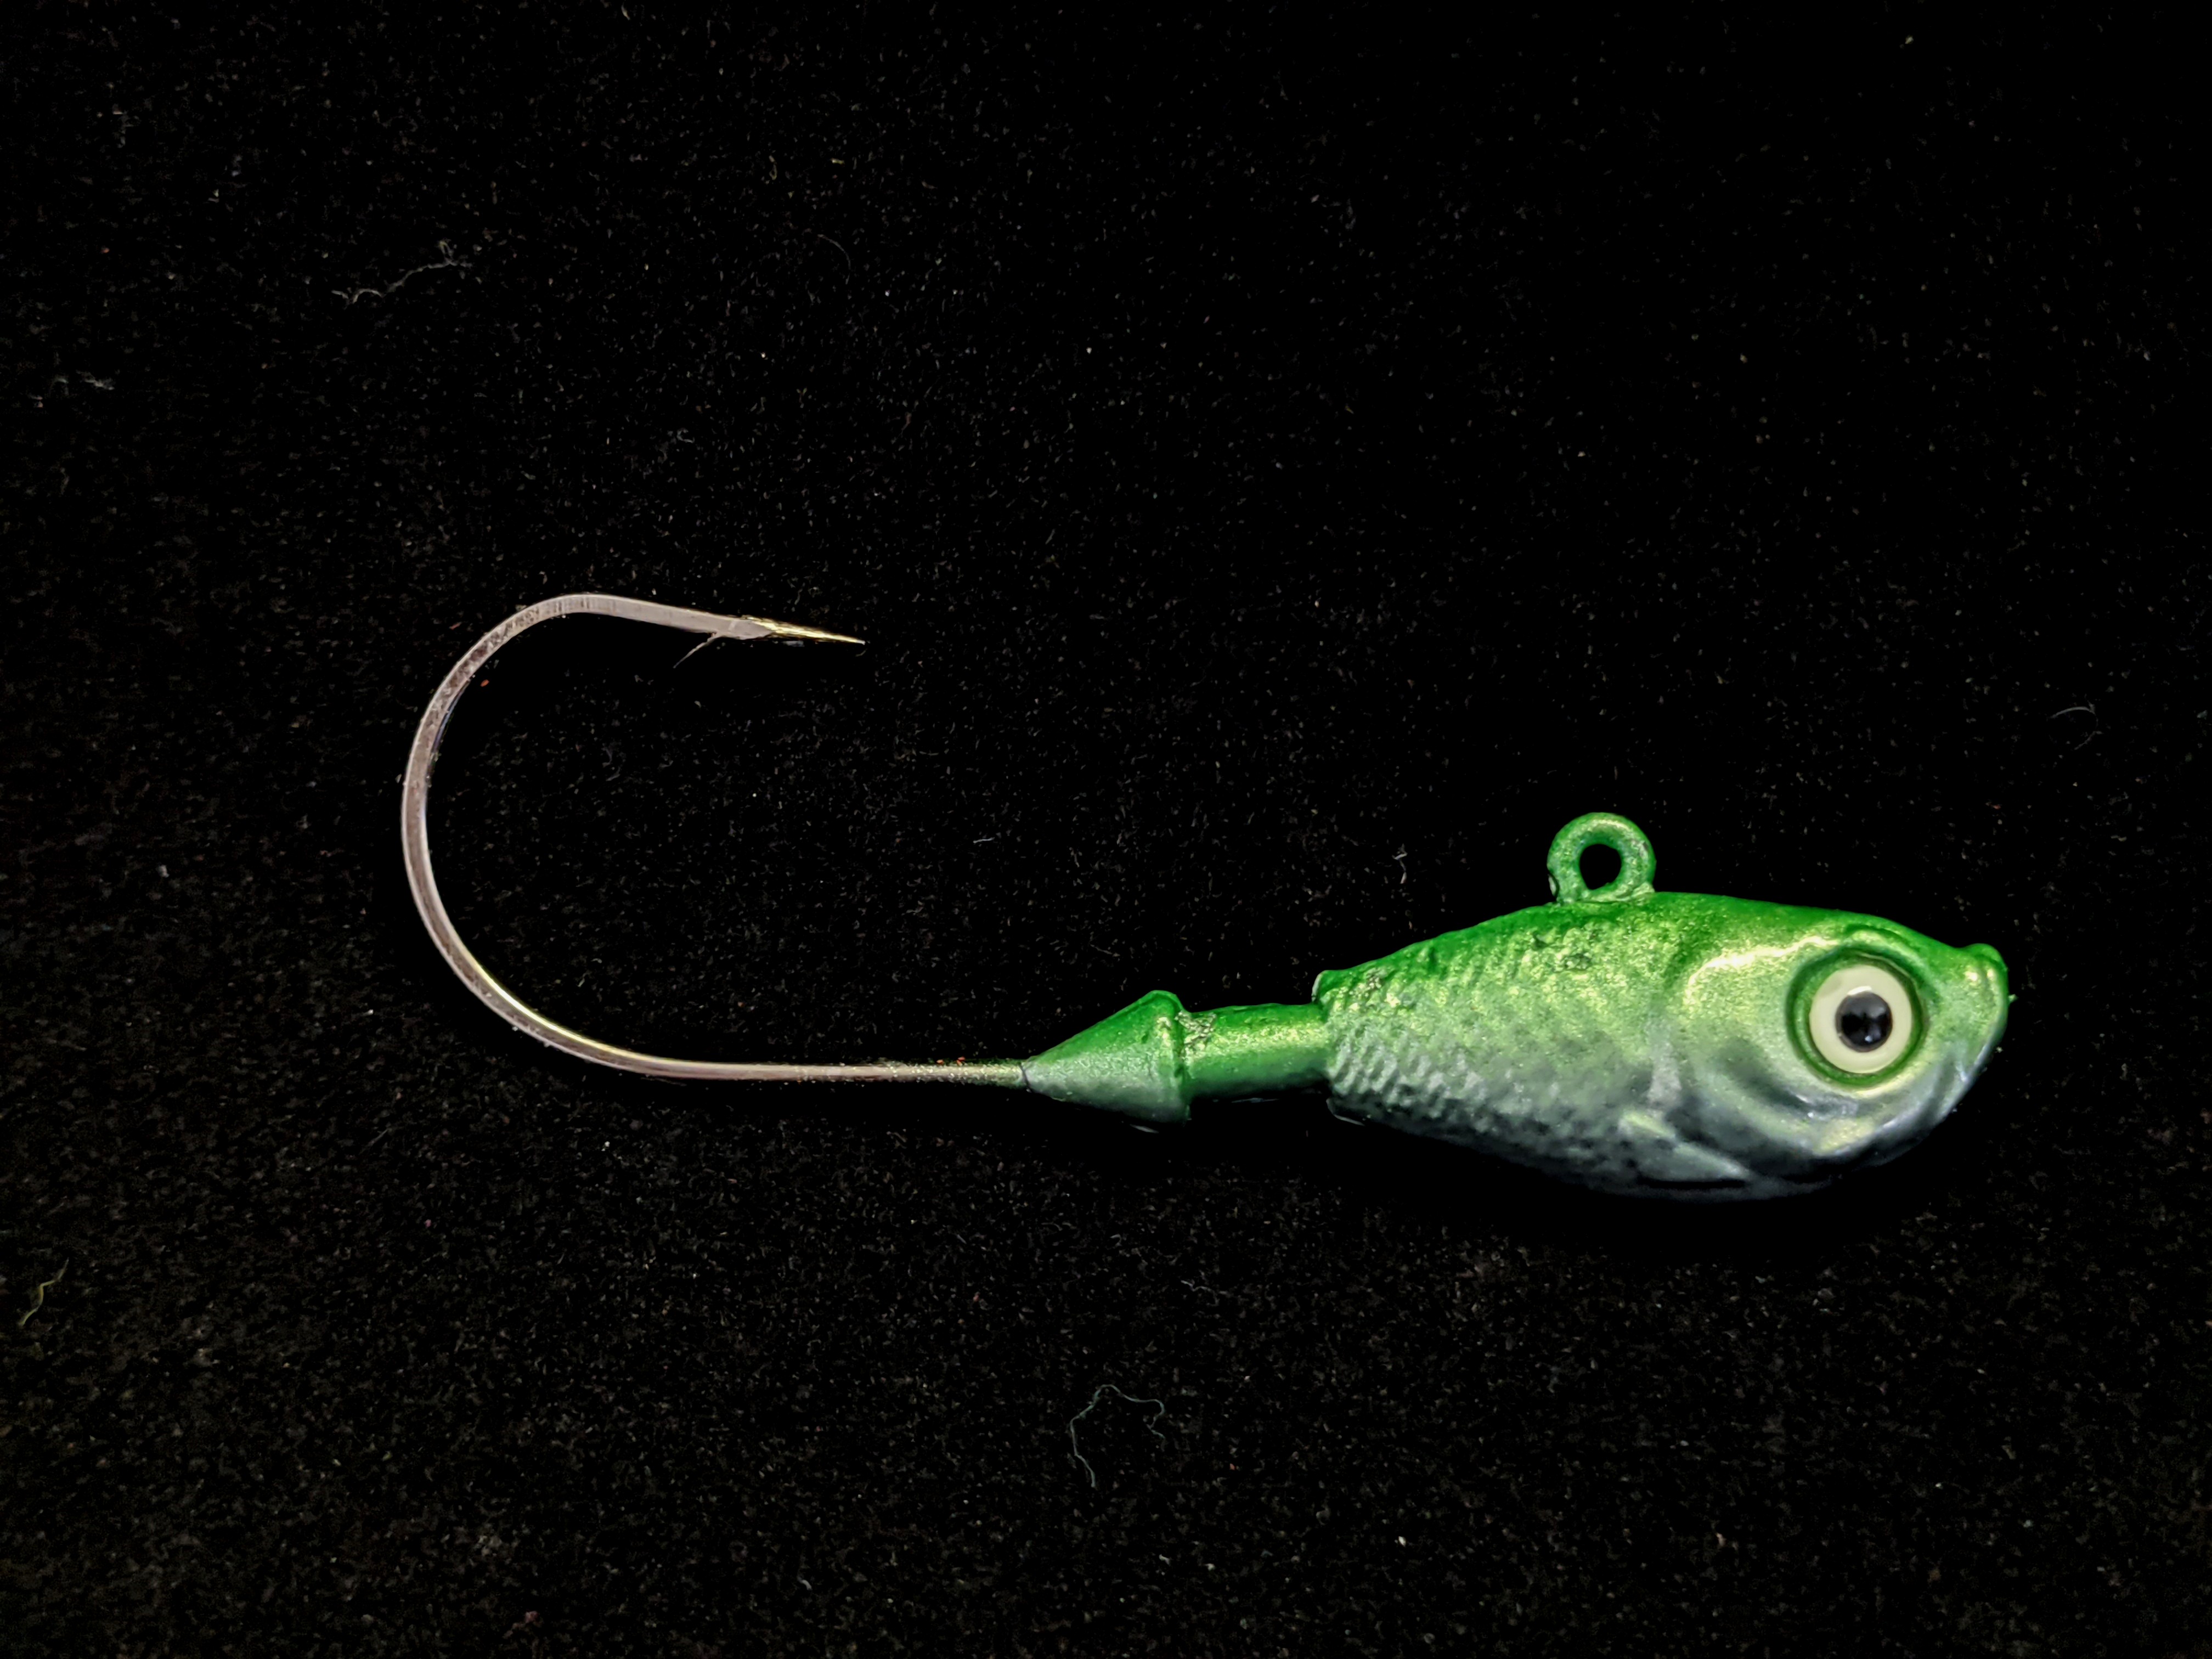 18 PCS. ULTRA MINNOW JIG LURE 3/8,1/4,1/8 OZ #1/0 WITH TWO EYES/UNPAINTED 6  EA.